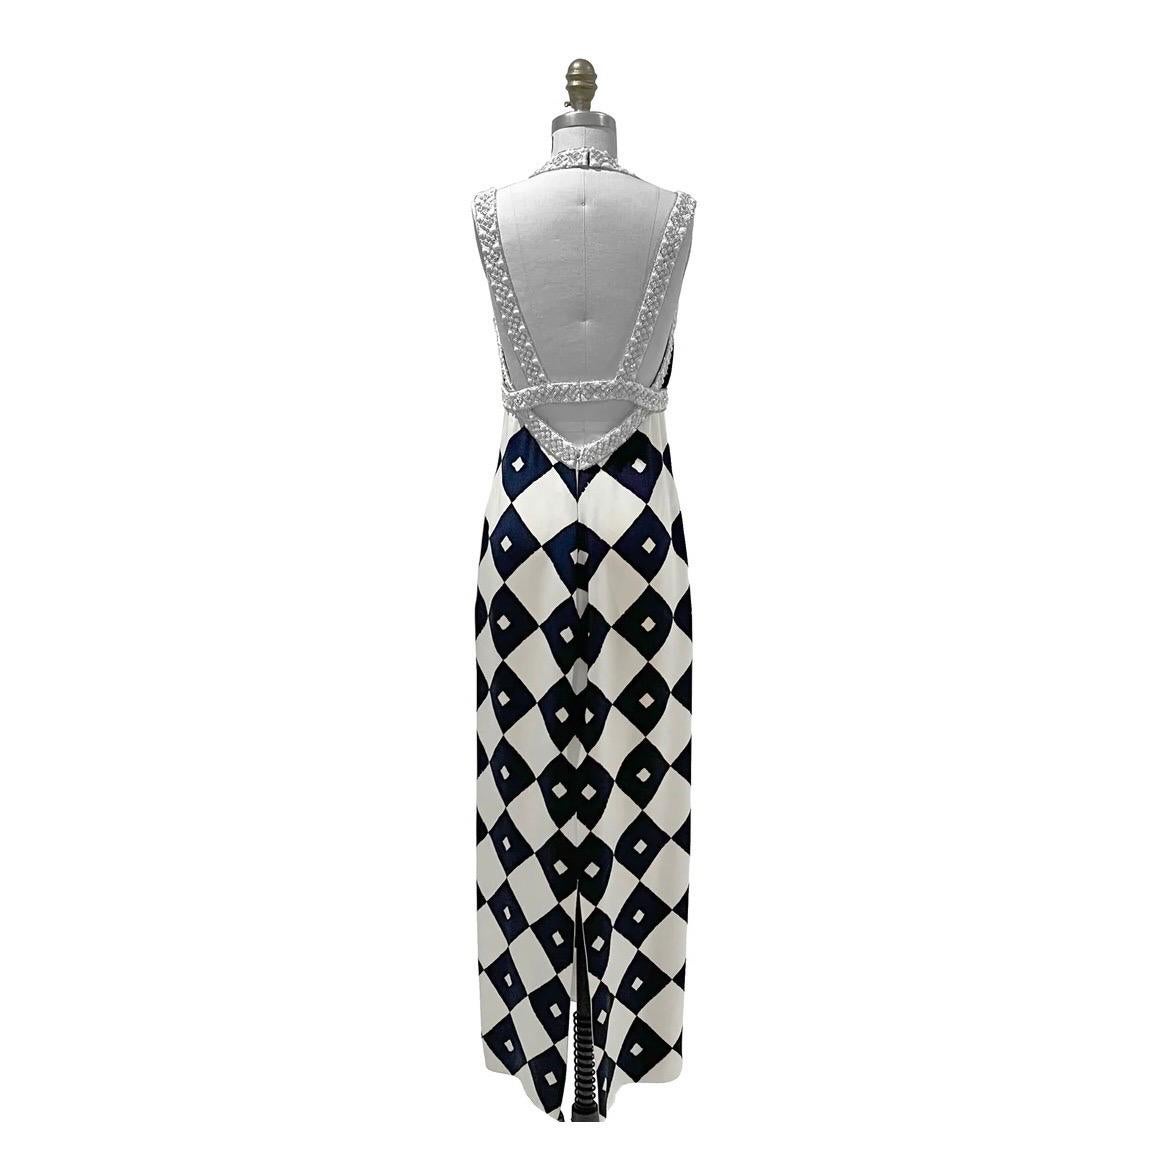 James Galanos Halterneck Gown 
Vintage 
Circa late 1980's or early 1990's 
White and Navy Blue 
Geometric diamond pattern 
Column style gown
Halter style neckline 
Bust and straps have white and crystal beaded embellishment
V neckline 
Open back